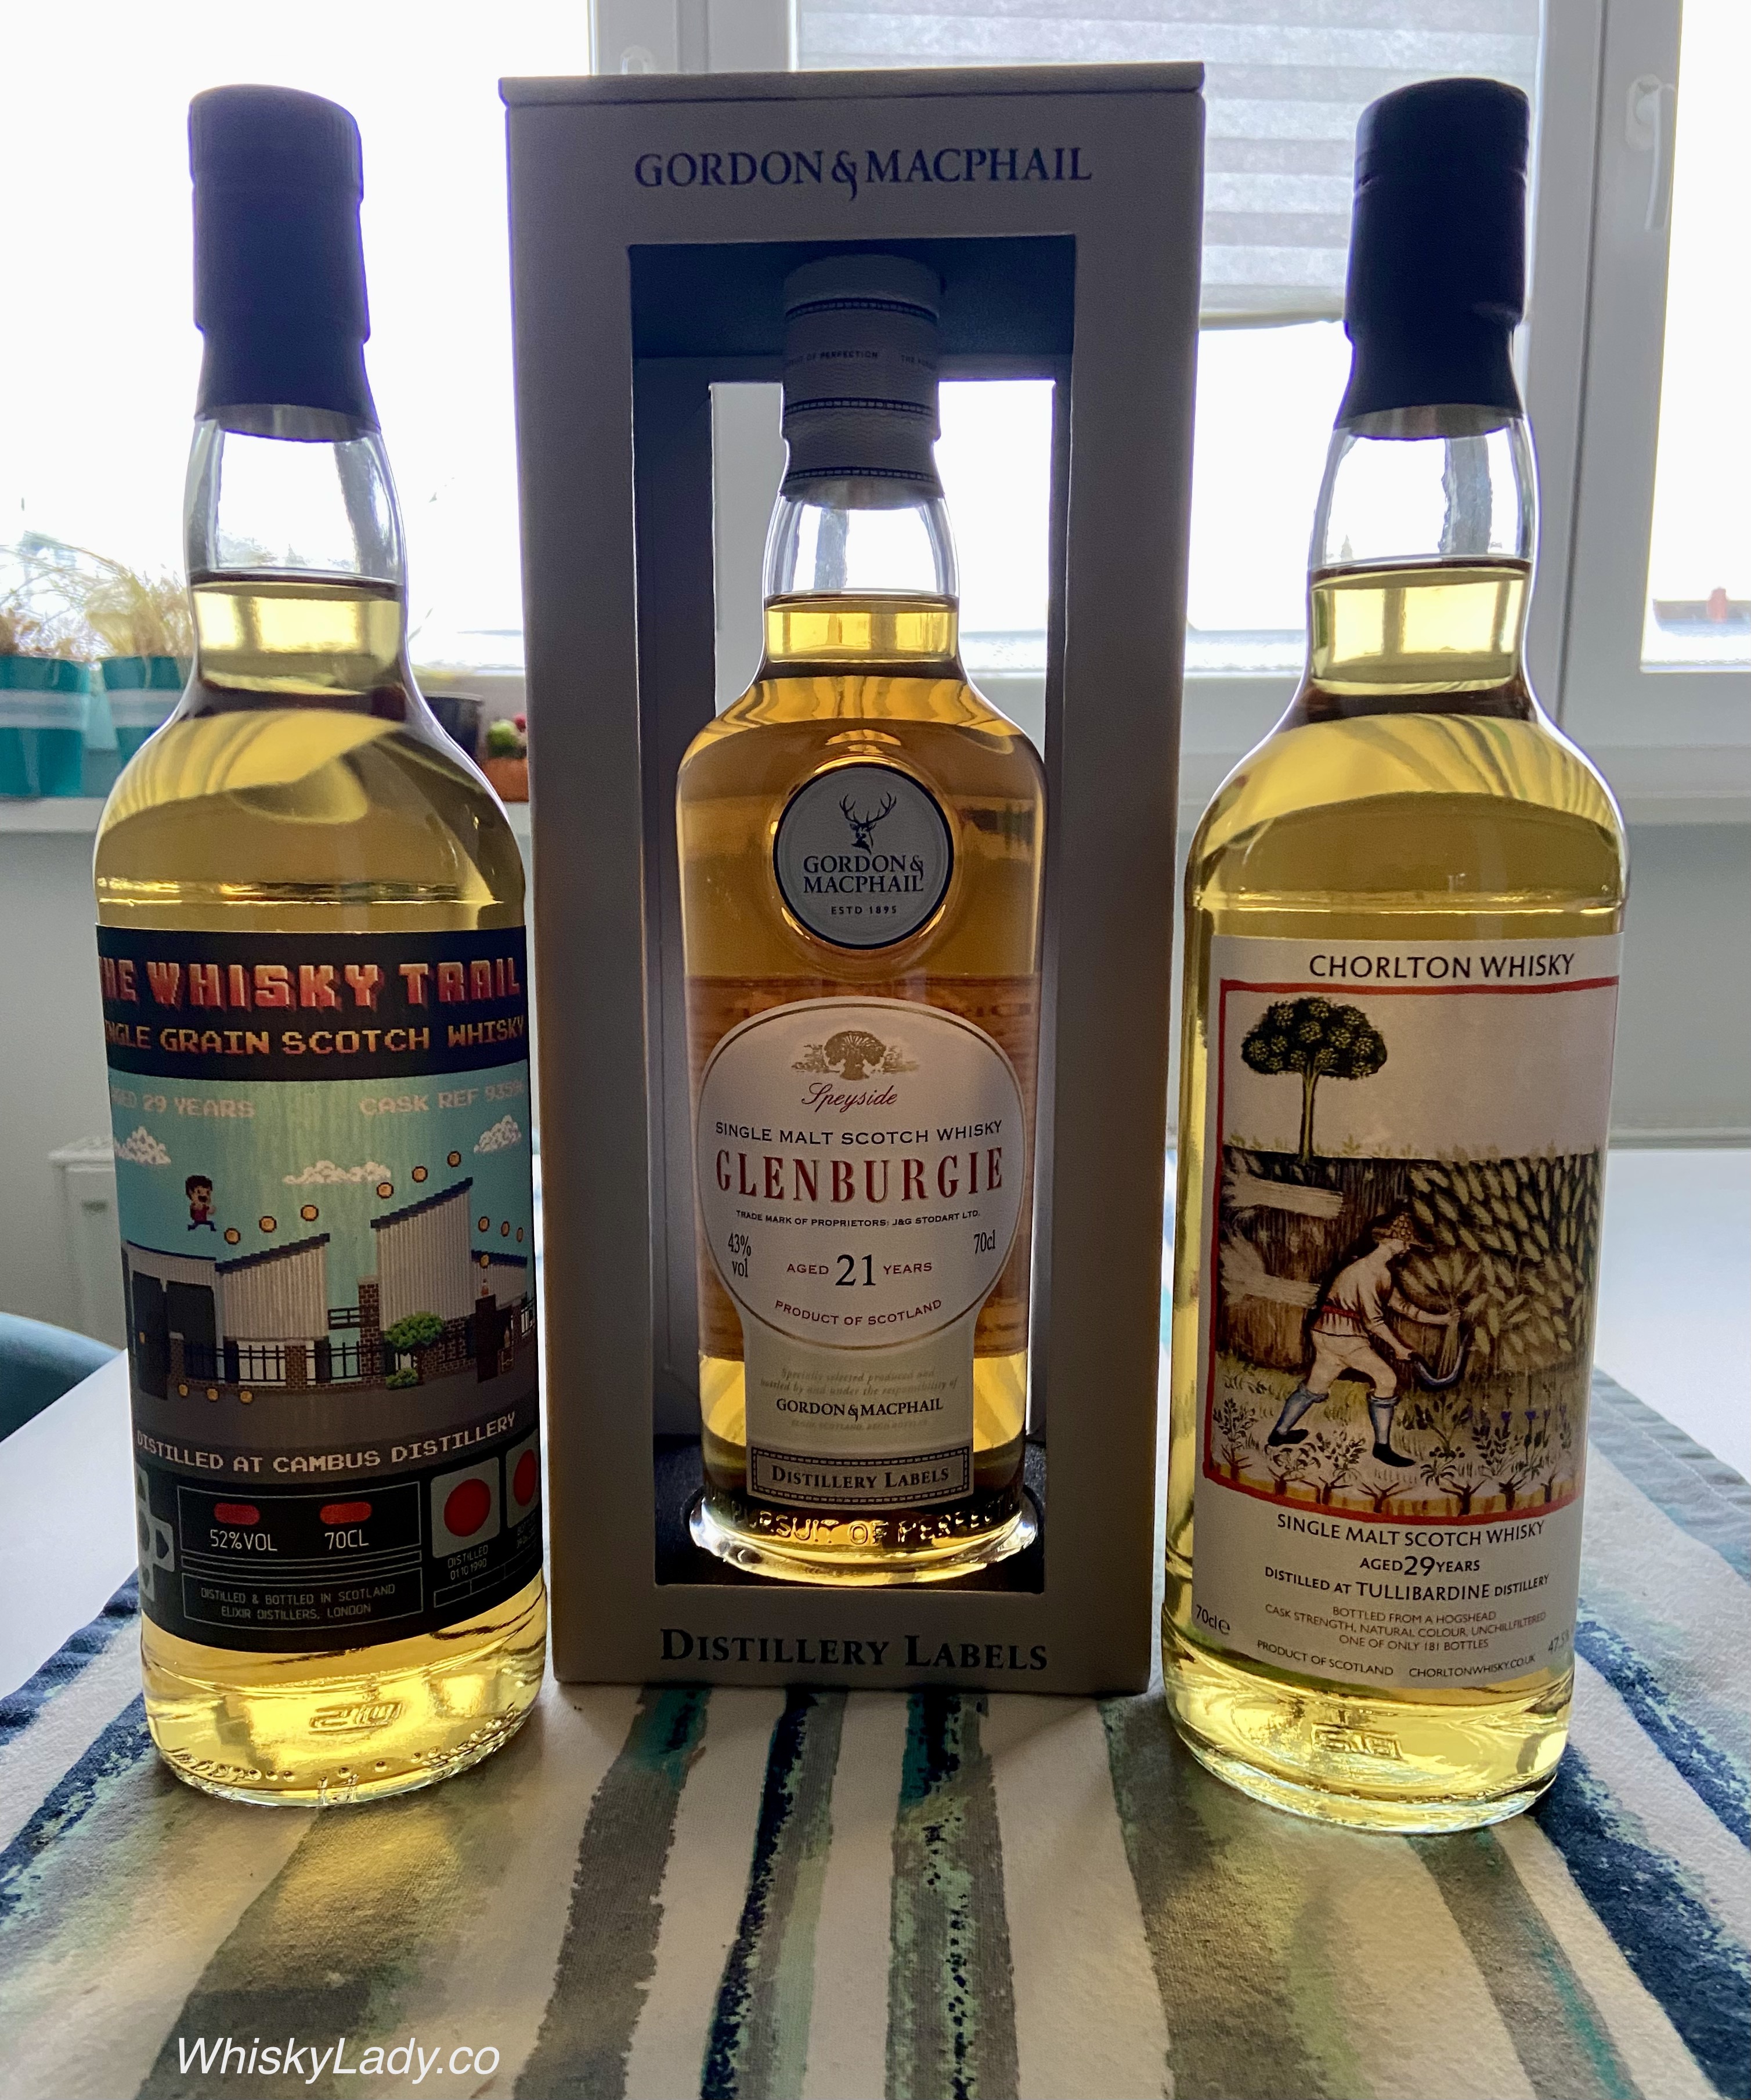 Discontinued/Closed   Whisky Lady